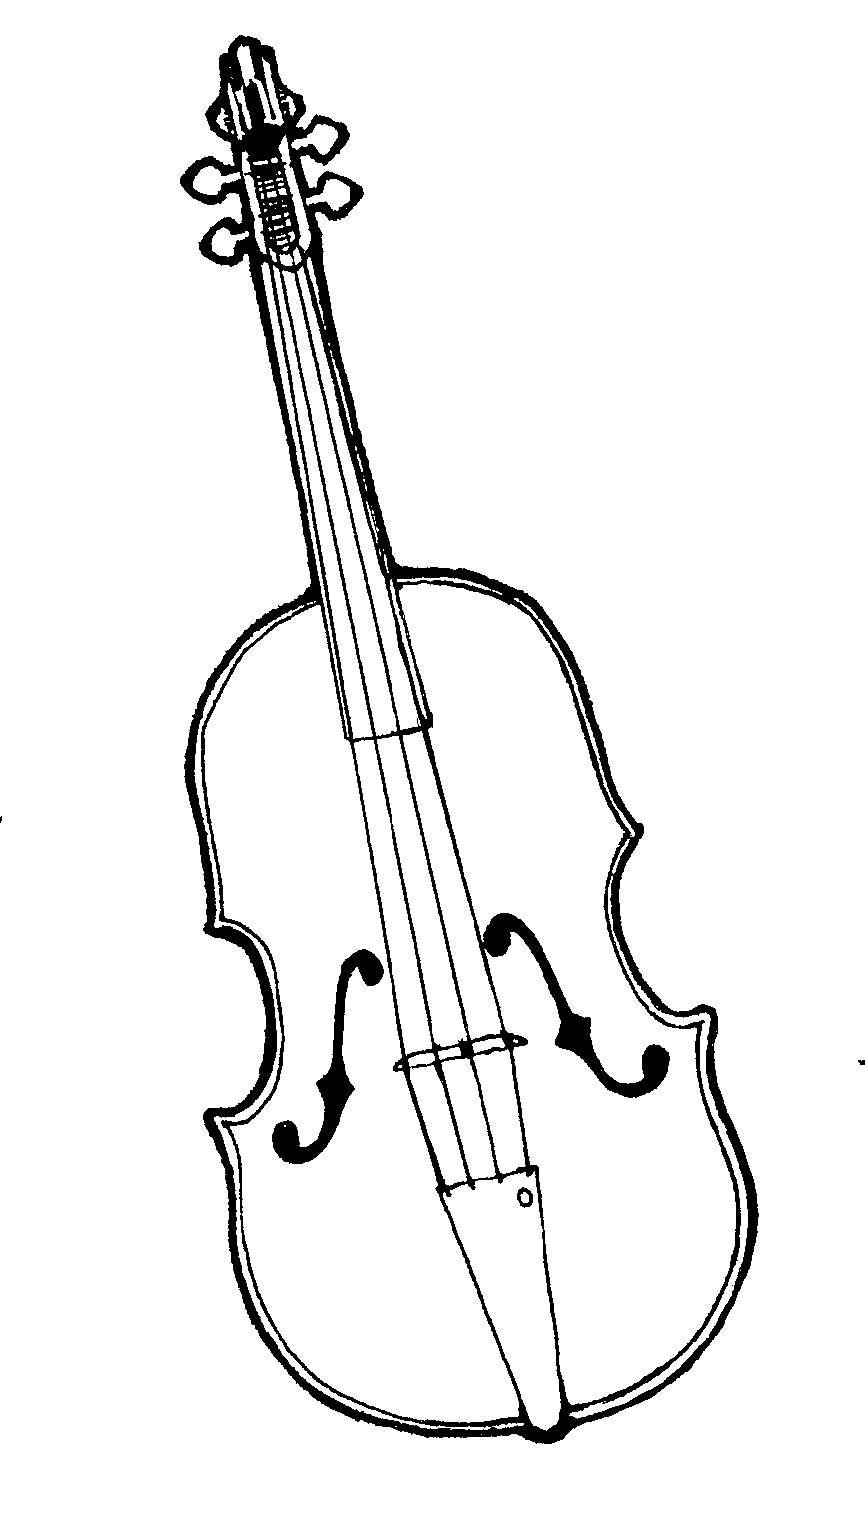 free clipart images violin - photo #41